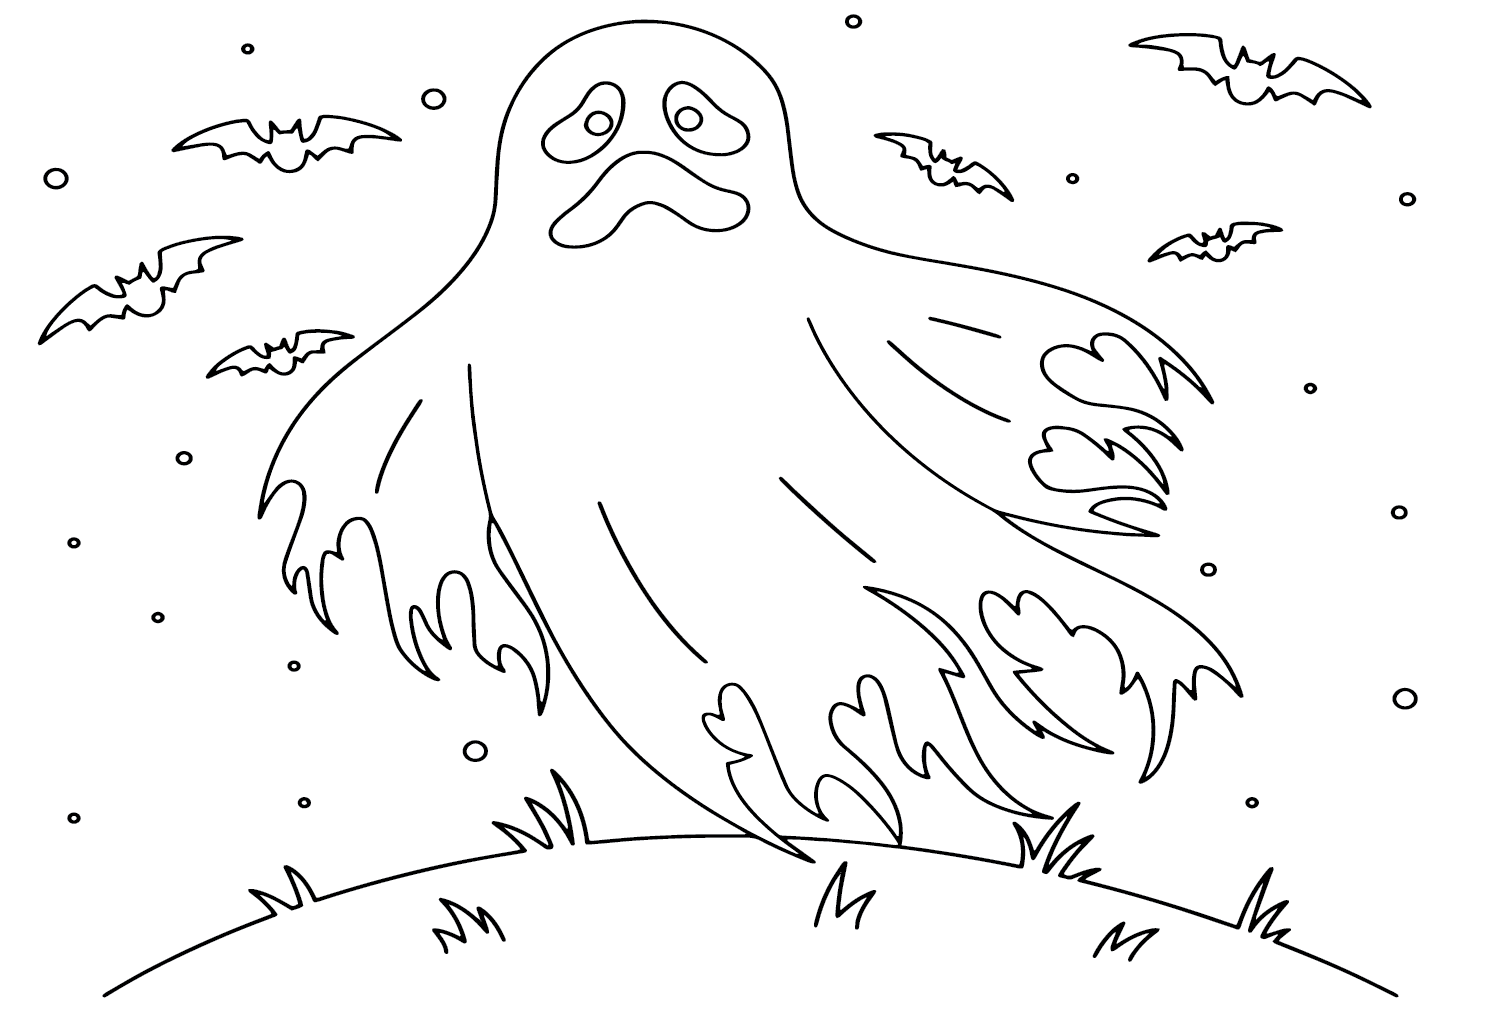 Coloring Page of a Ghost from Ghost